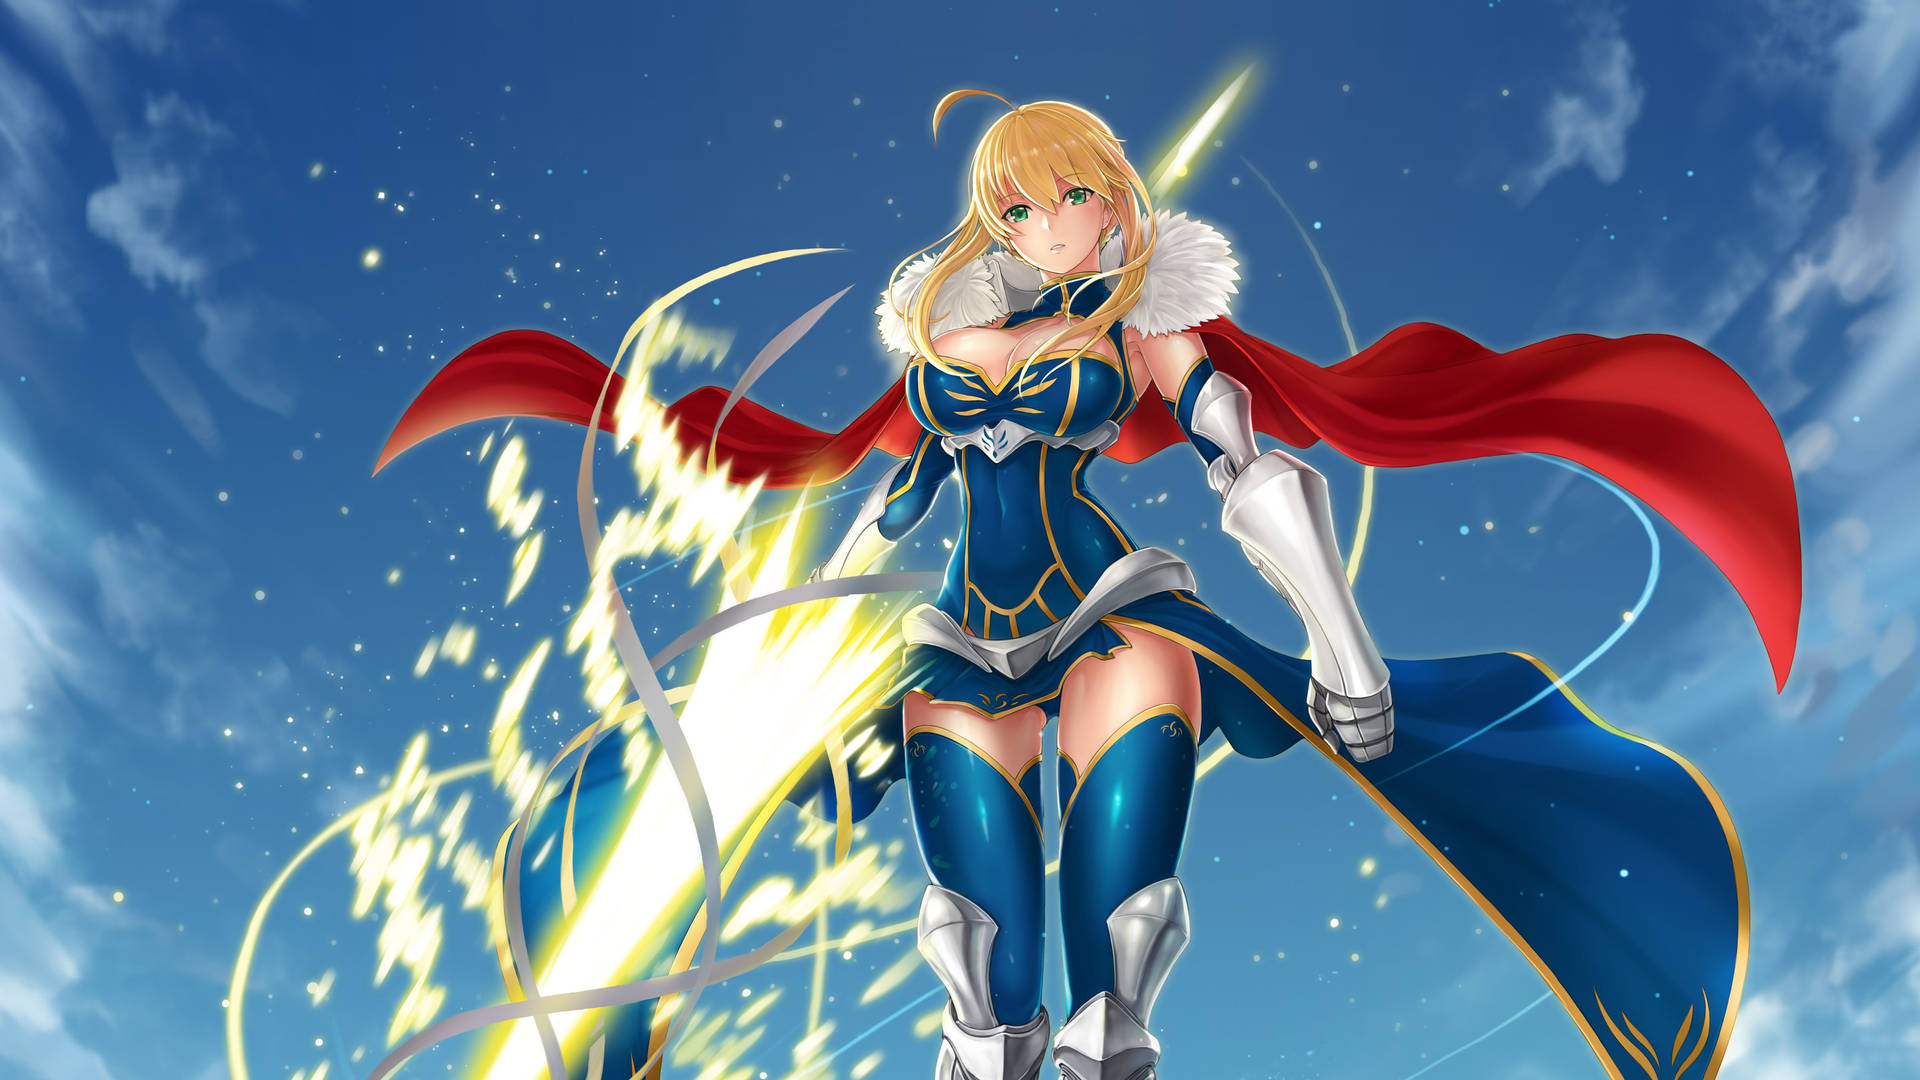 Epic Moment of Saber of Fate Unleashing Power Wallpaper